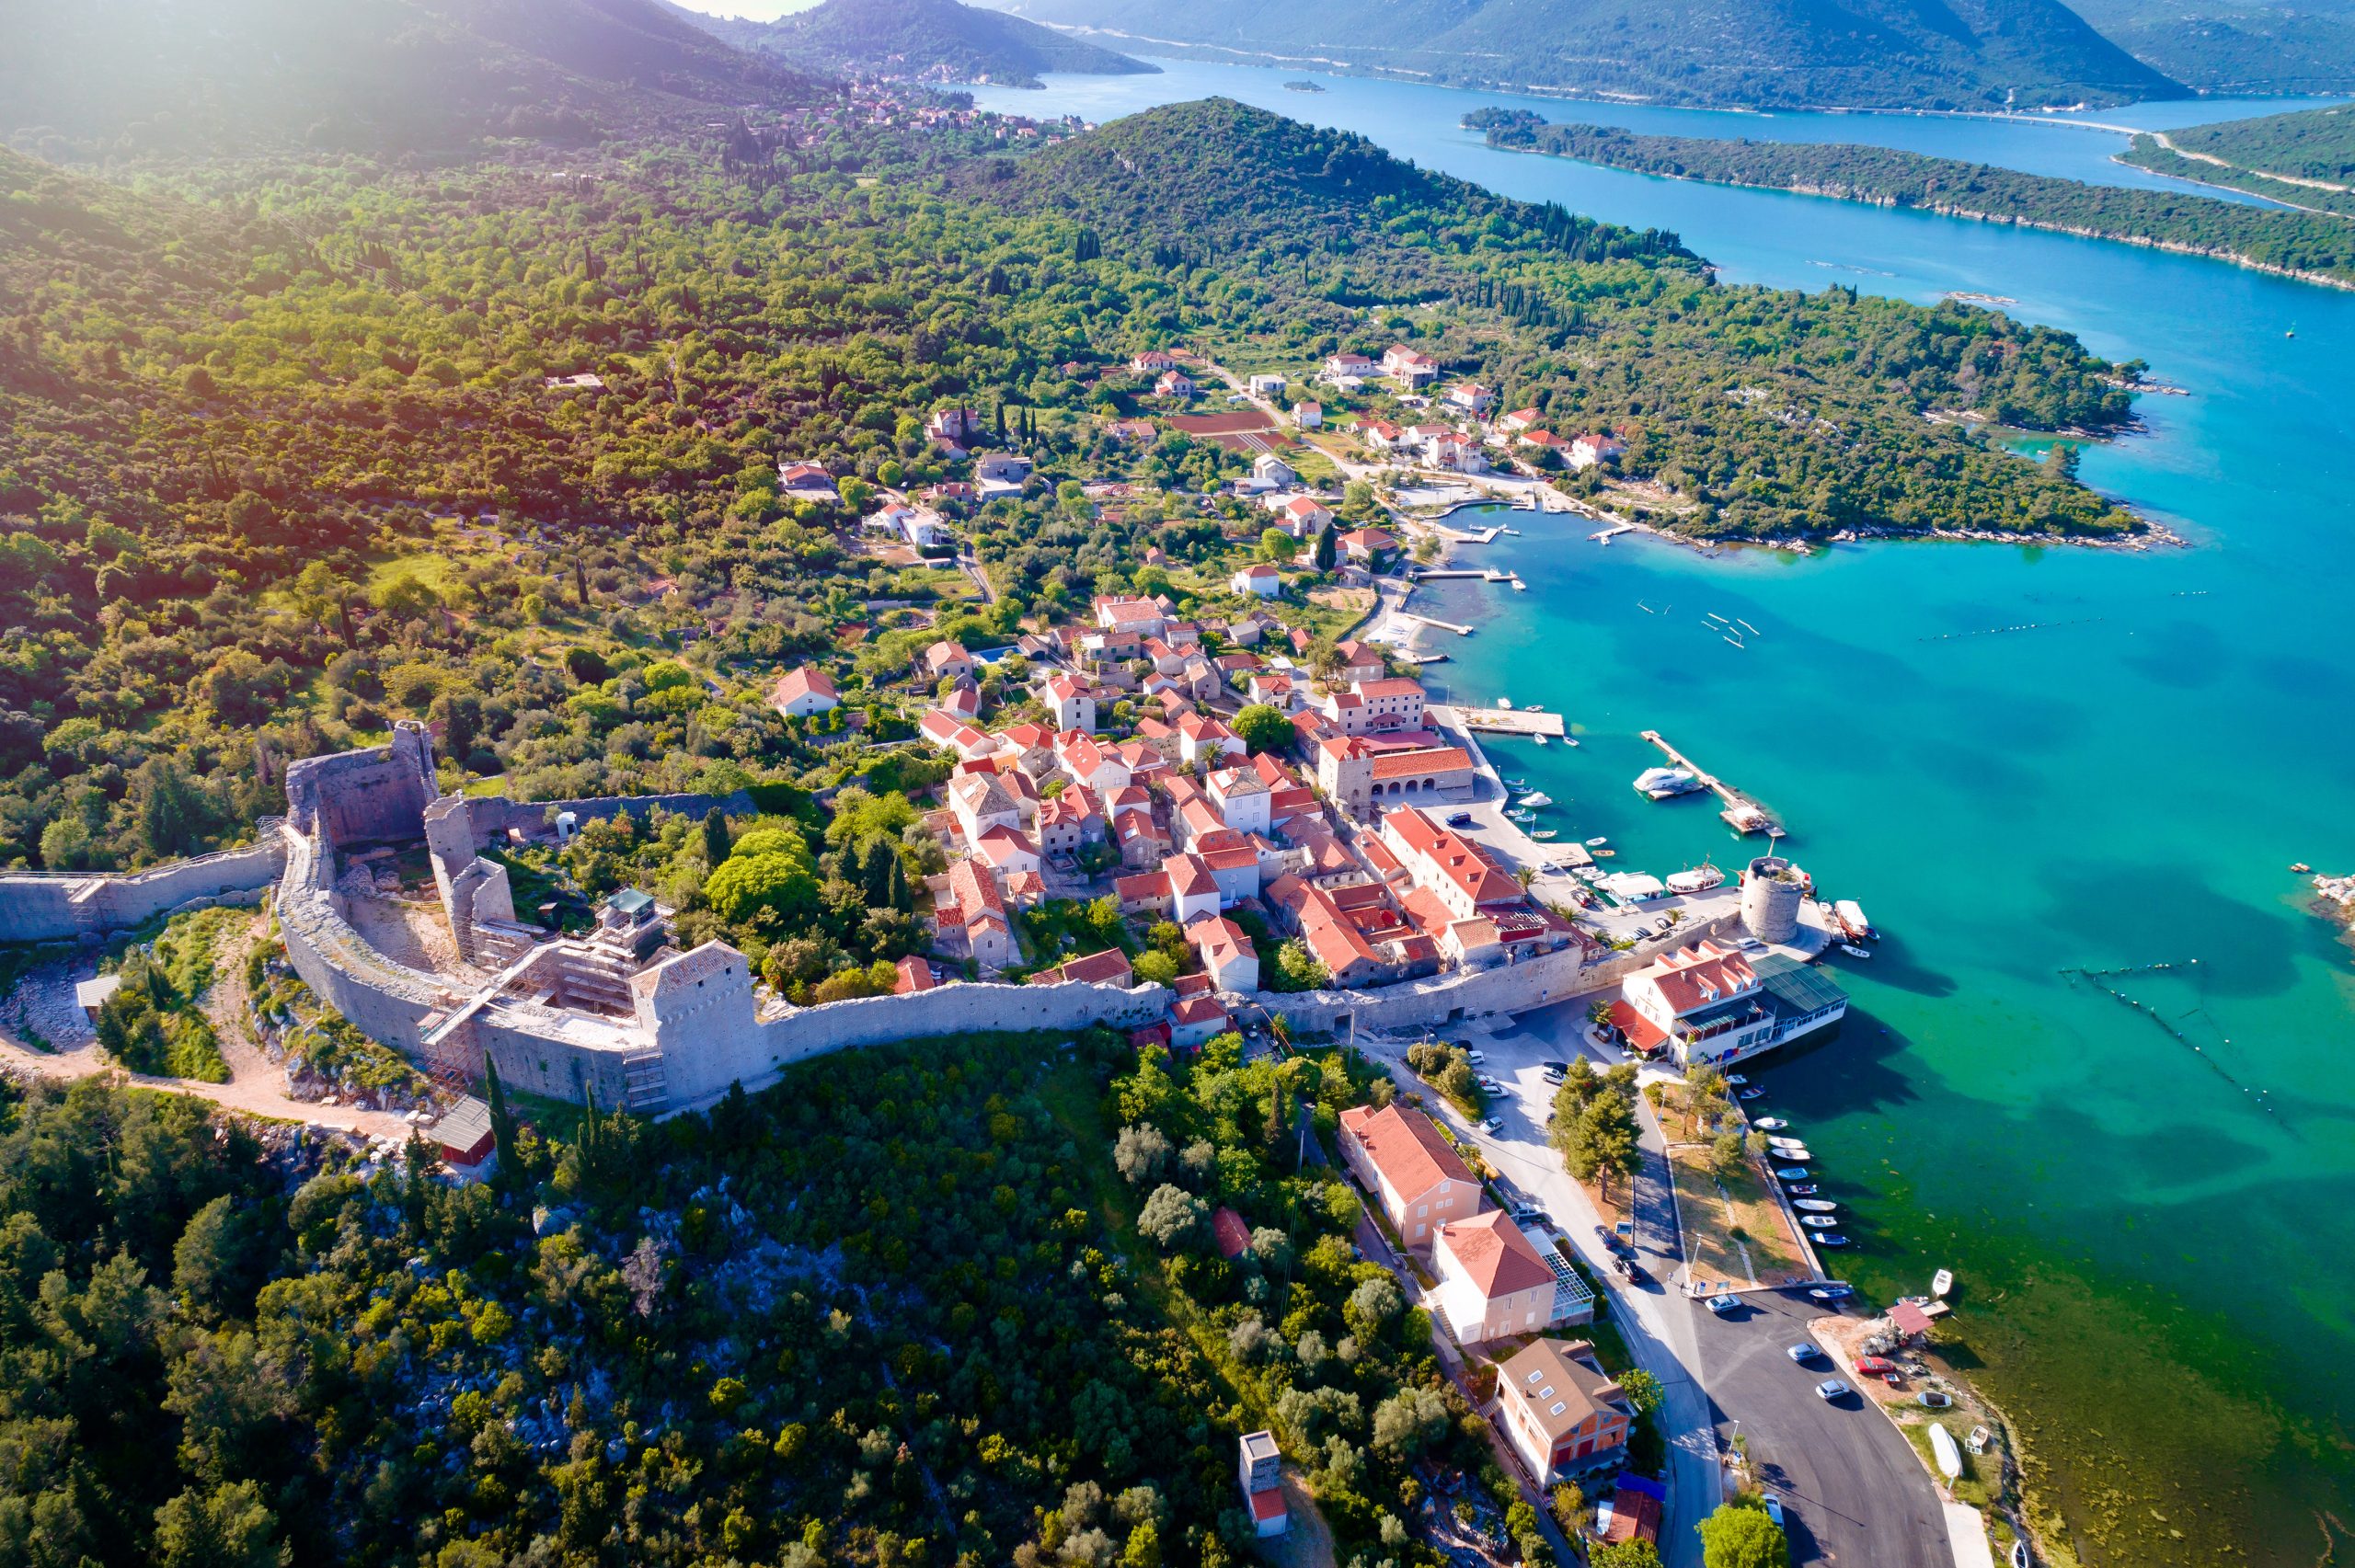 Visit Mali Ston On Your Wine And Oyster Tasting Experience At The Pelješac Peninsula